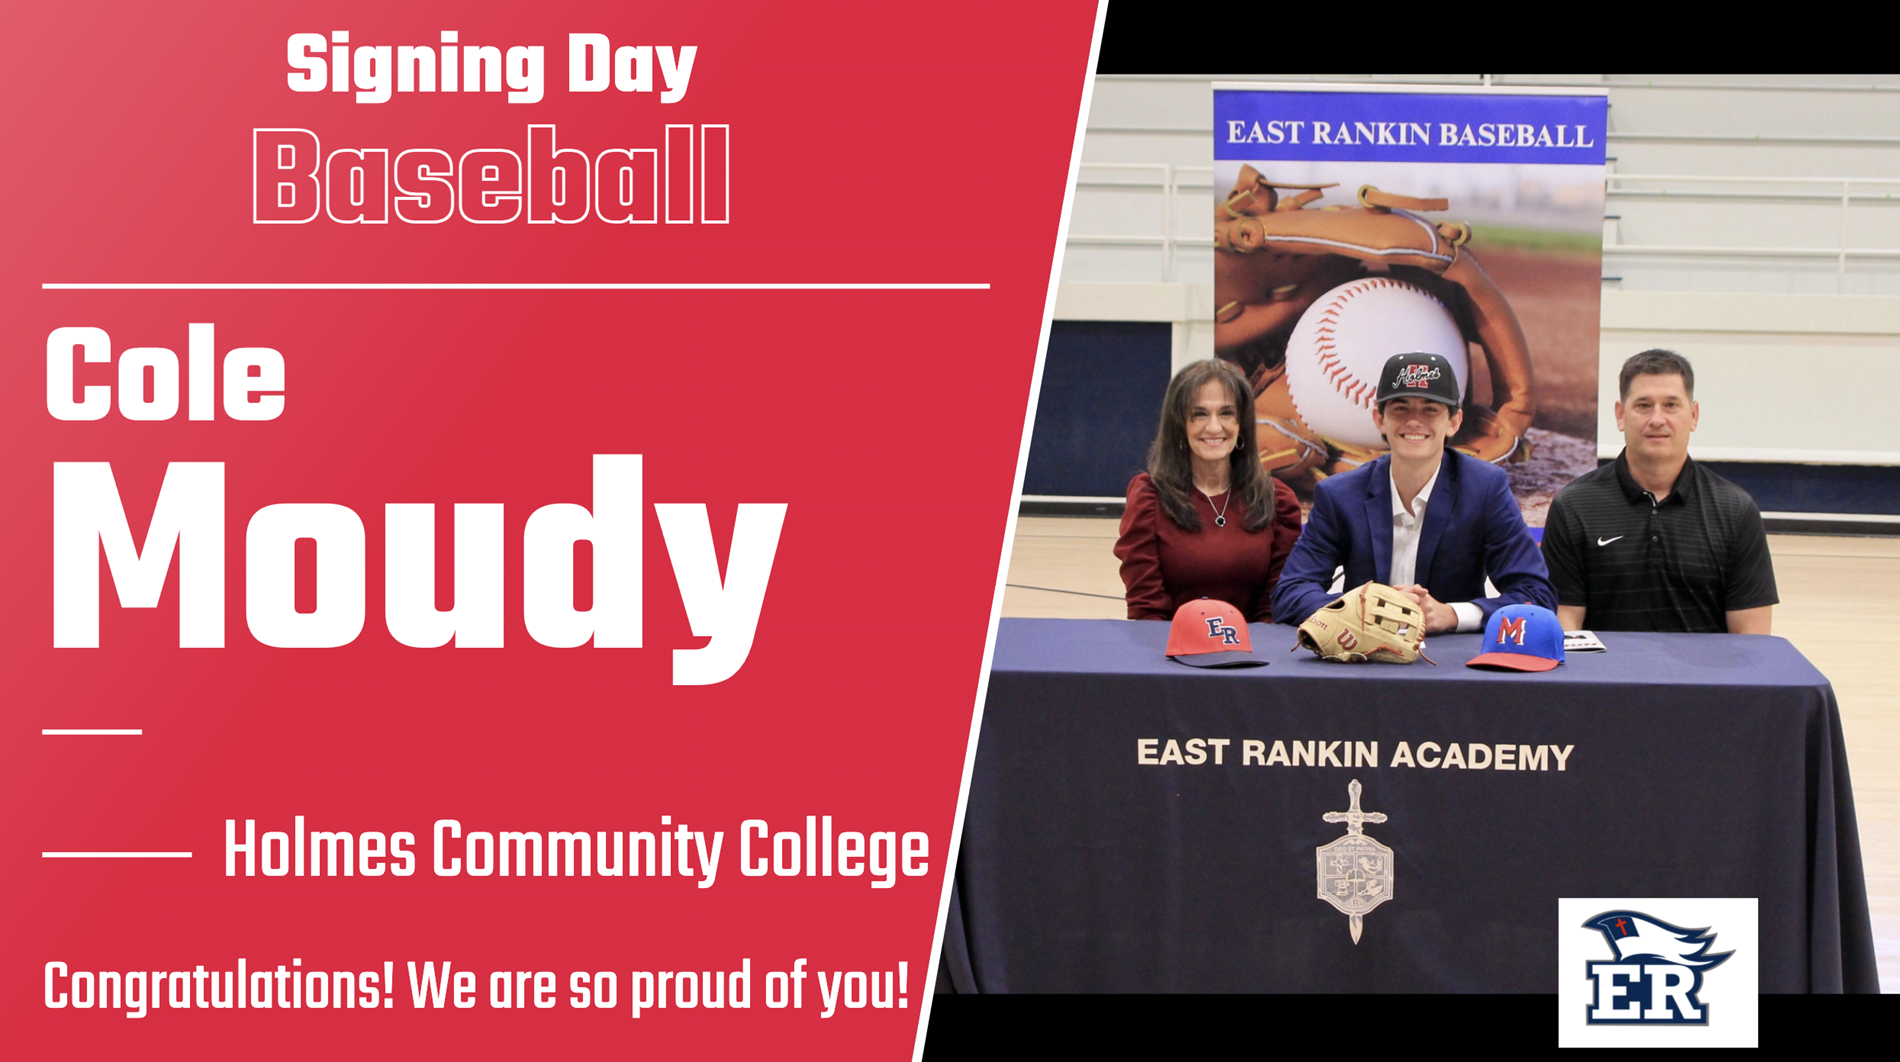 Cole Moudy-Baseball Signing Day